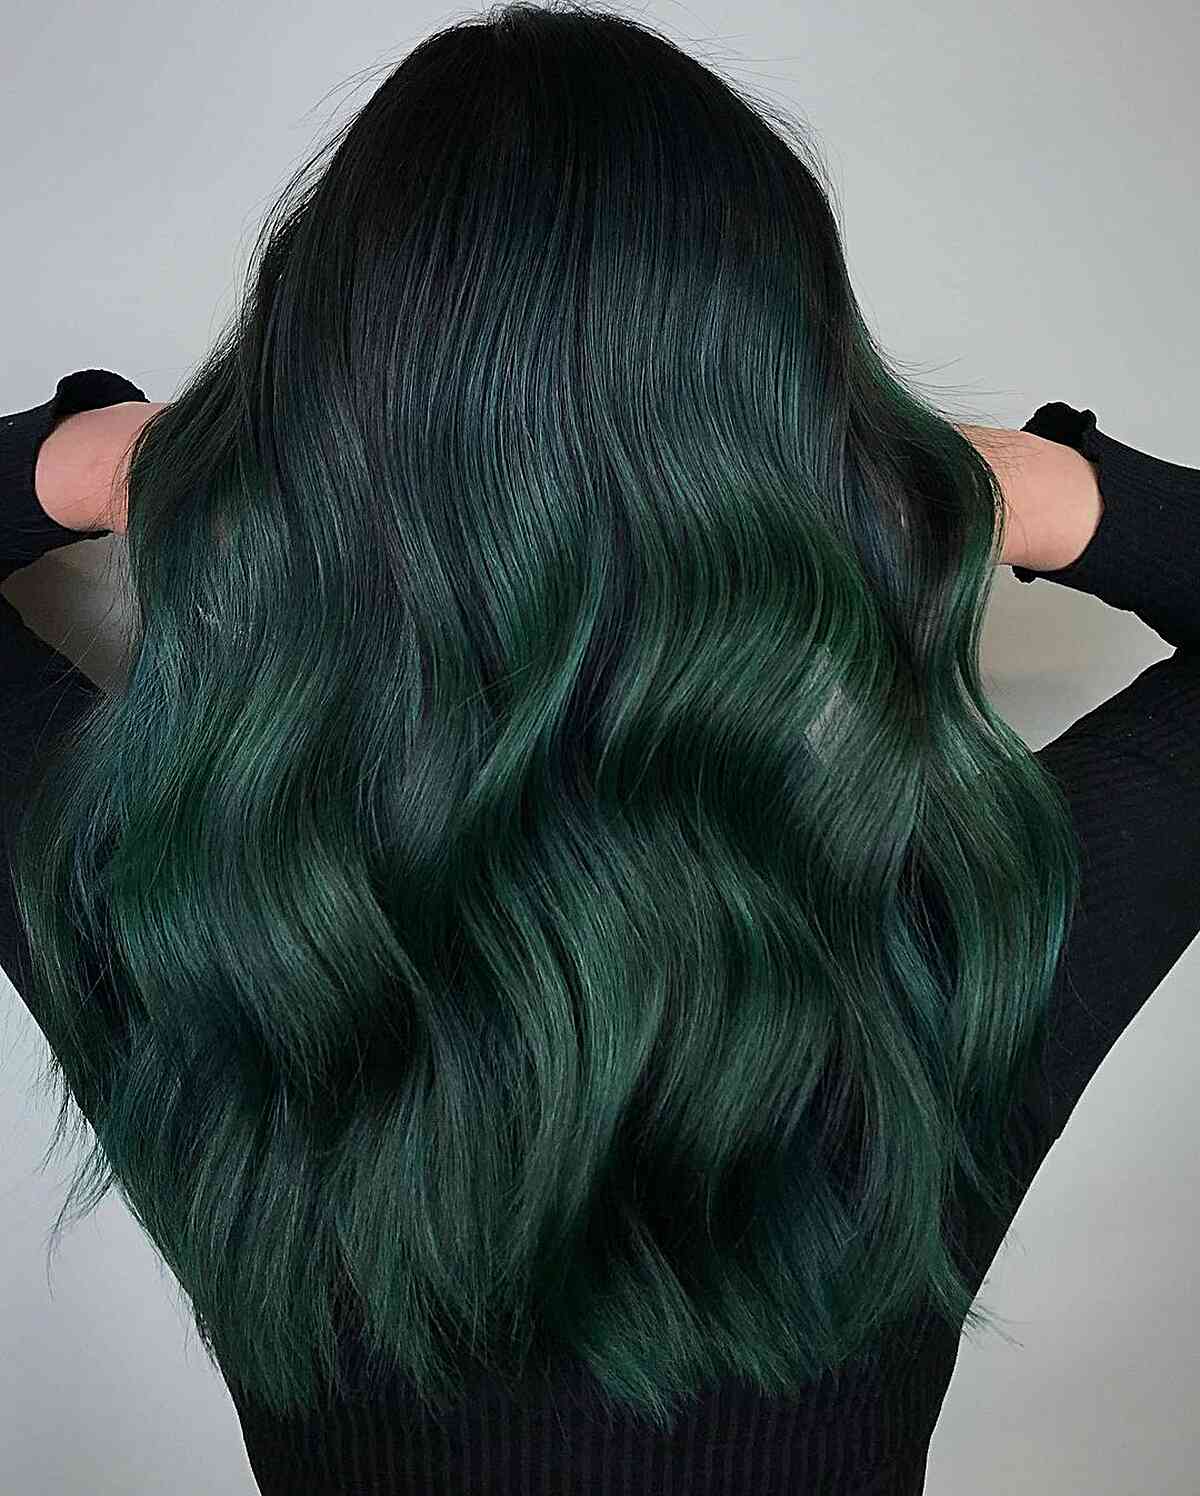 Dark Emerald Green Hair Color for women with long straight hair